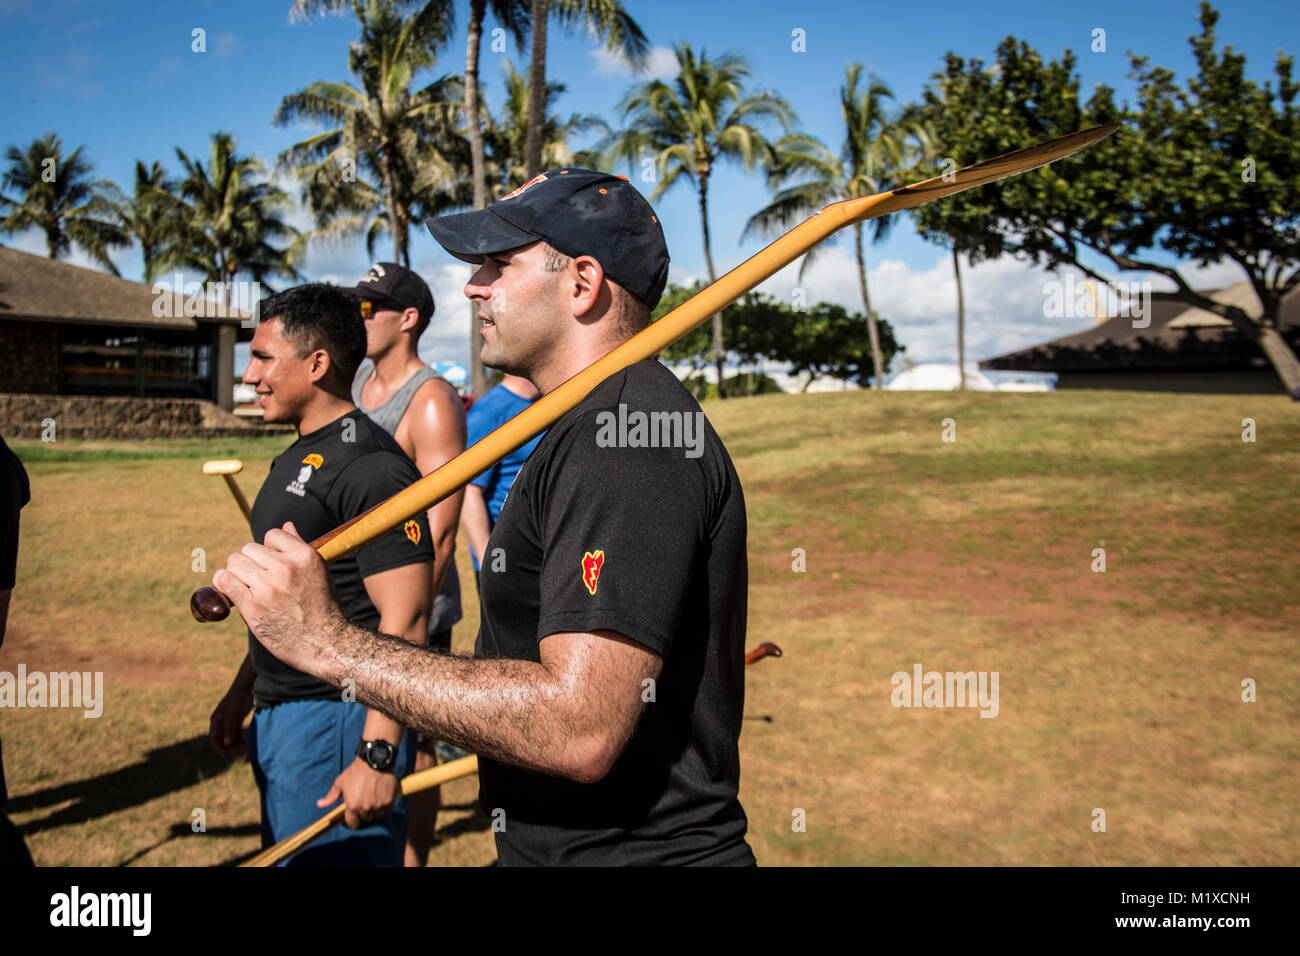 U.S. Army 1st. Lt. Pete Falcone, assigned to 1st Battalion, 27th Infantry Regiment, 2nd Infantry Brigade Combat Team, 25th Infantry Division listens to paddle instruction before the start of the team-building exercise in Keehi Lagoon, Honolulu, Hi., Jan. 30, 2018. In an effort to strengthen international relationships, United States Army Pacific hosted personnel from the British Army to participate in a team building exercise facilitating outrigger canoeing. (U.S. Army Stock Photo